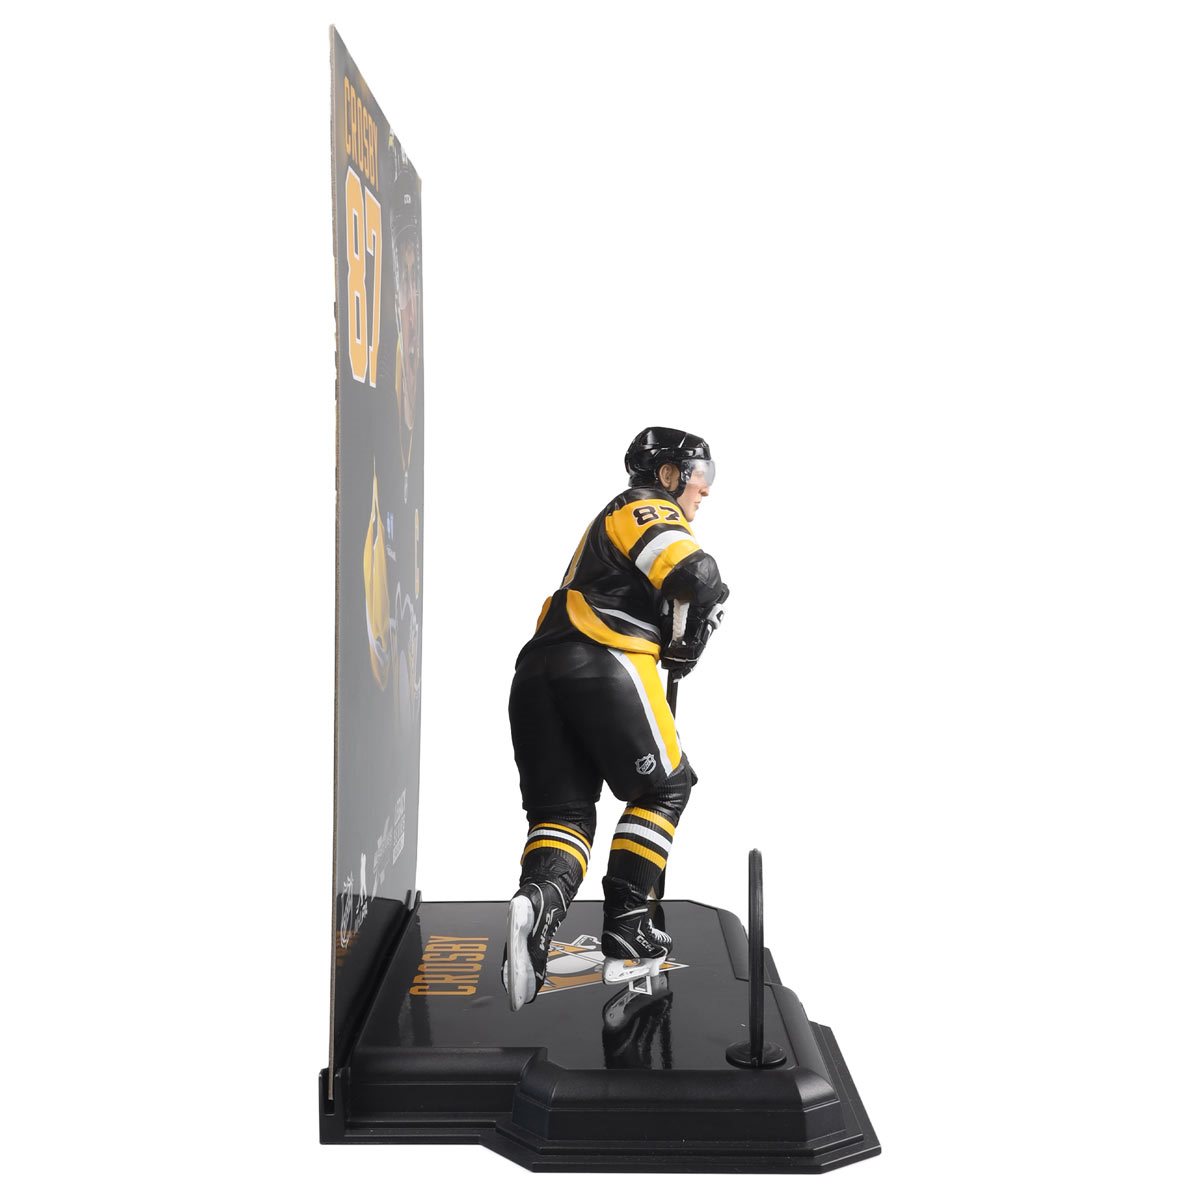 pittsburgh penguins mystery box